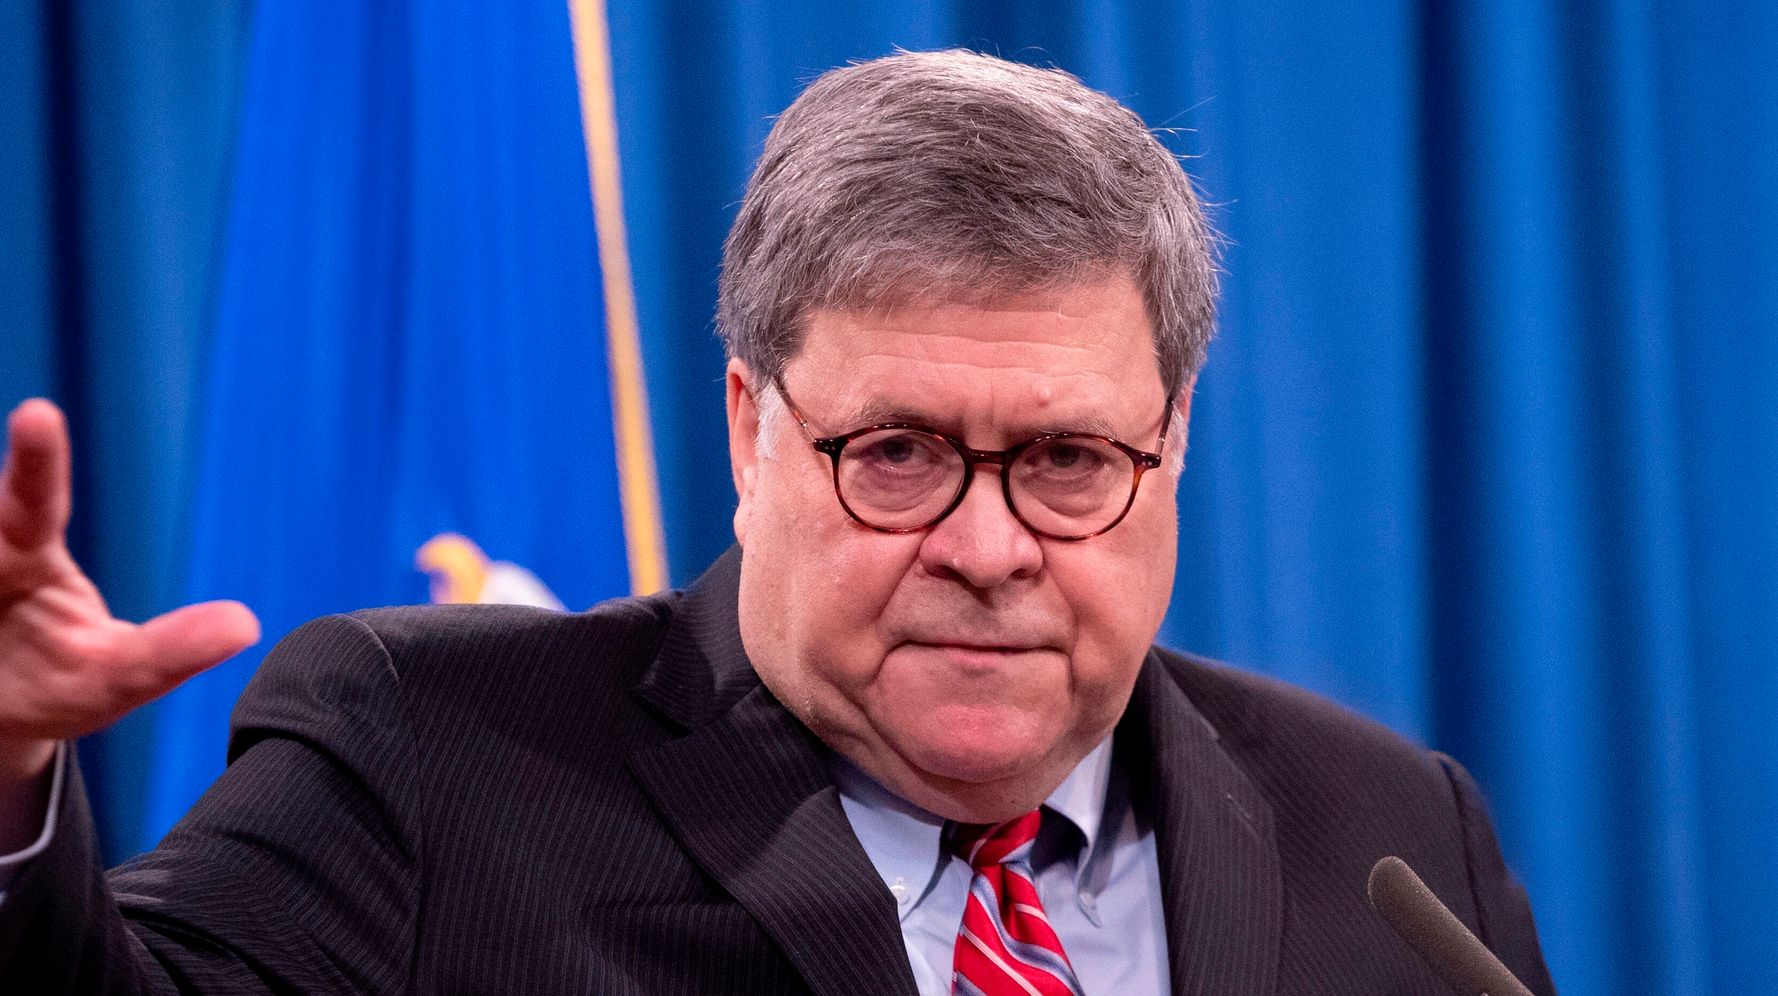 William Barr’s Relationship With Trump Is ‘Nonexistent,’ Anderson Cooper Told